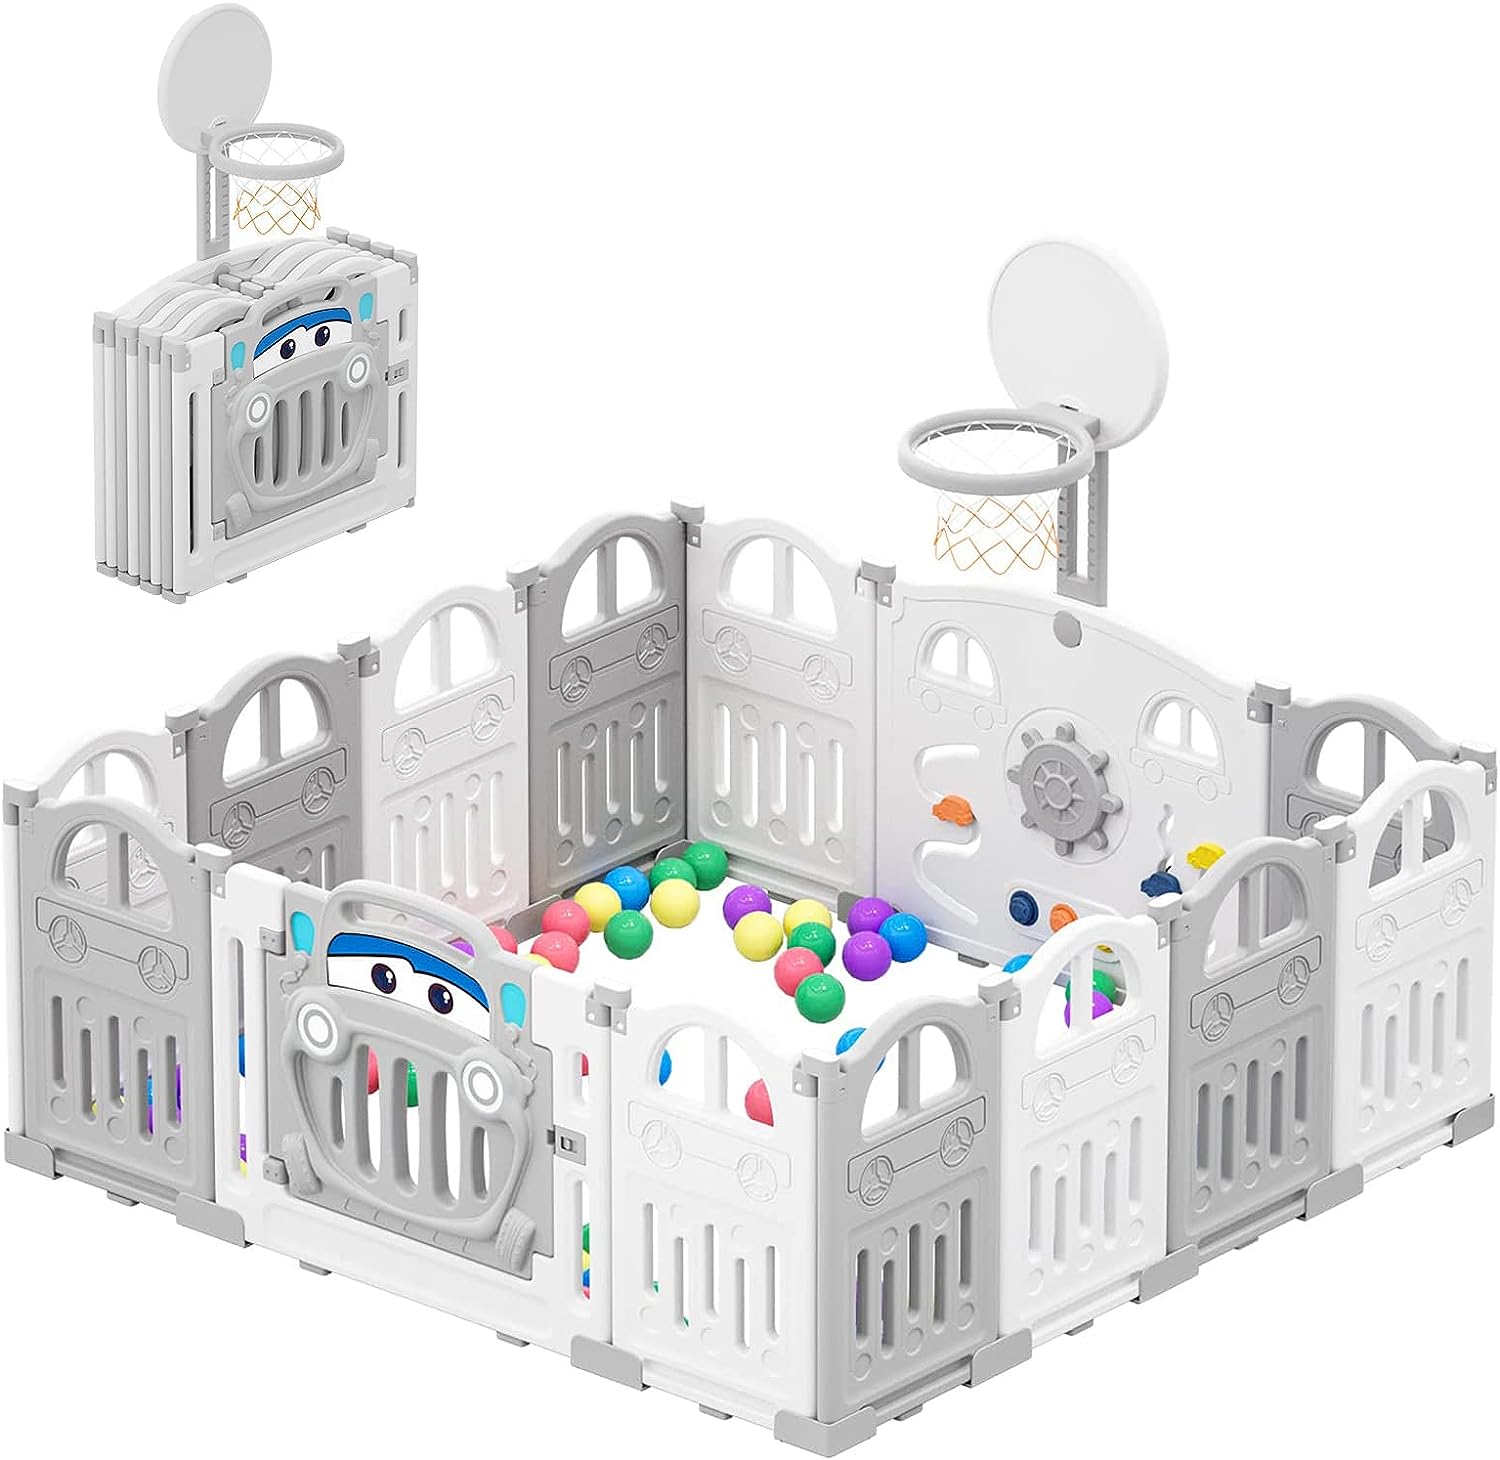 Large Baby Ball Pit Sturdy Play Pen/ Yard W/Basketball Hoop for Babies and  Toddlers Children's Fence Play Area, Indoor Outdoor Kids Activity Center